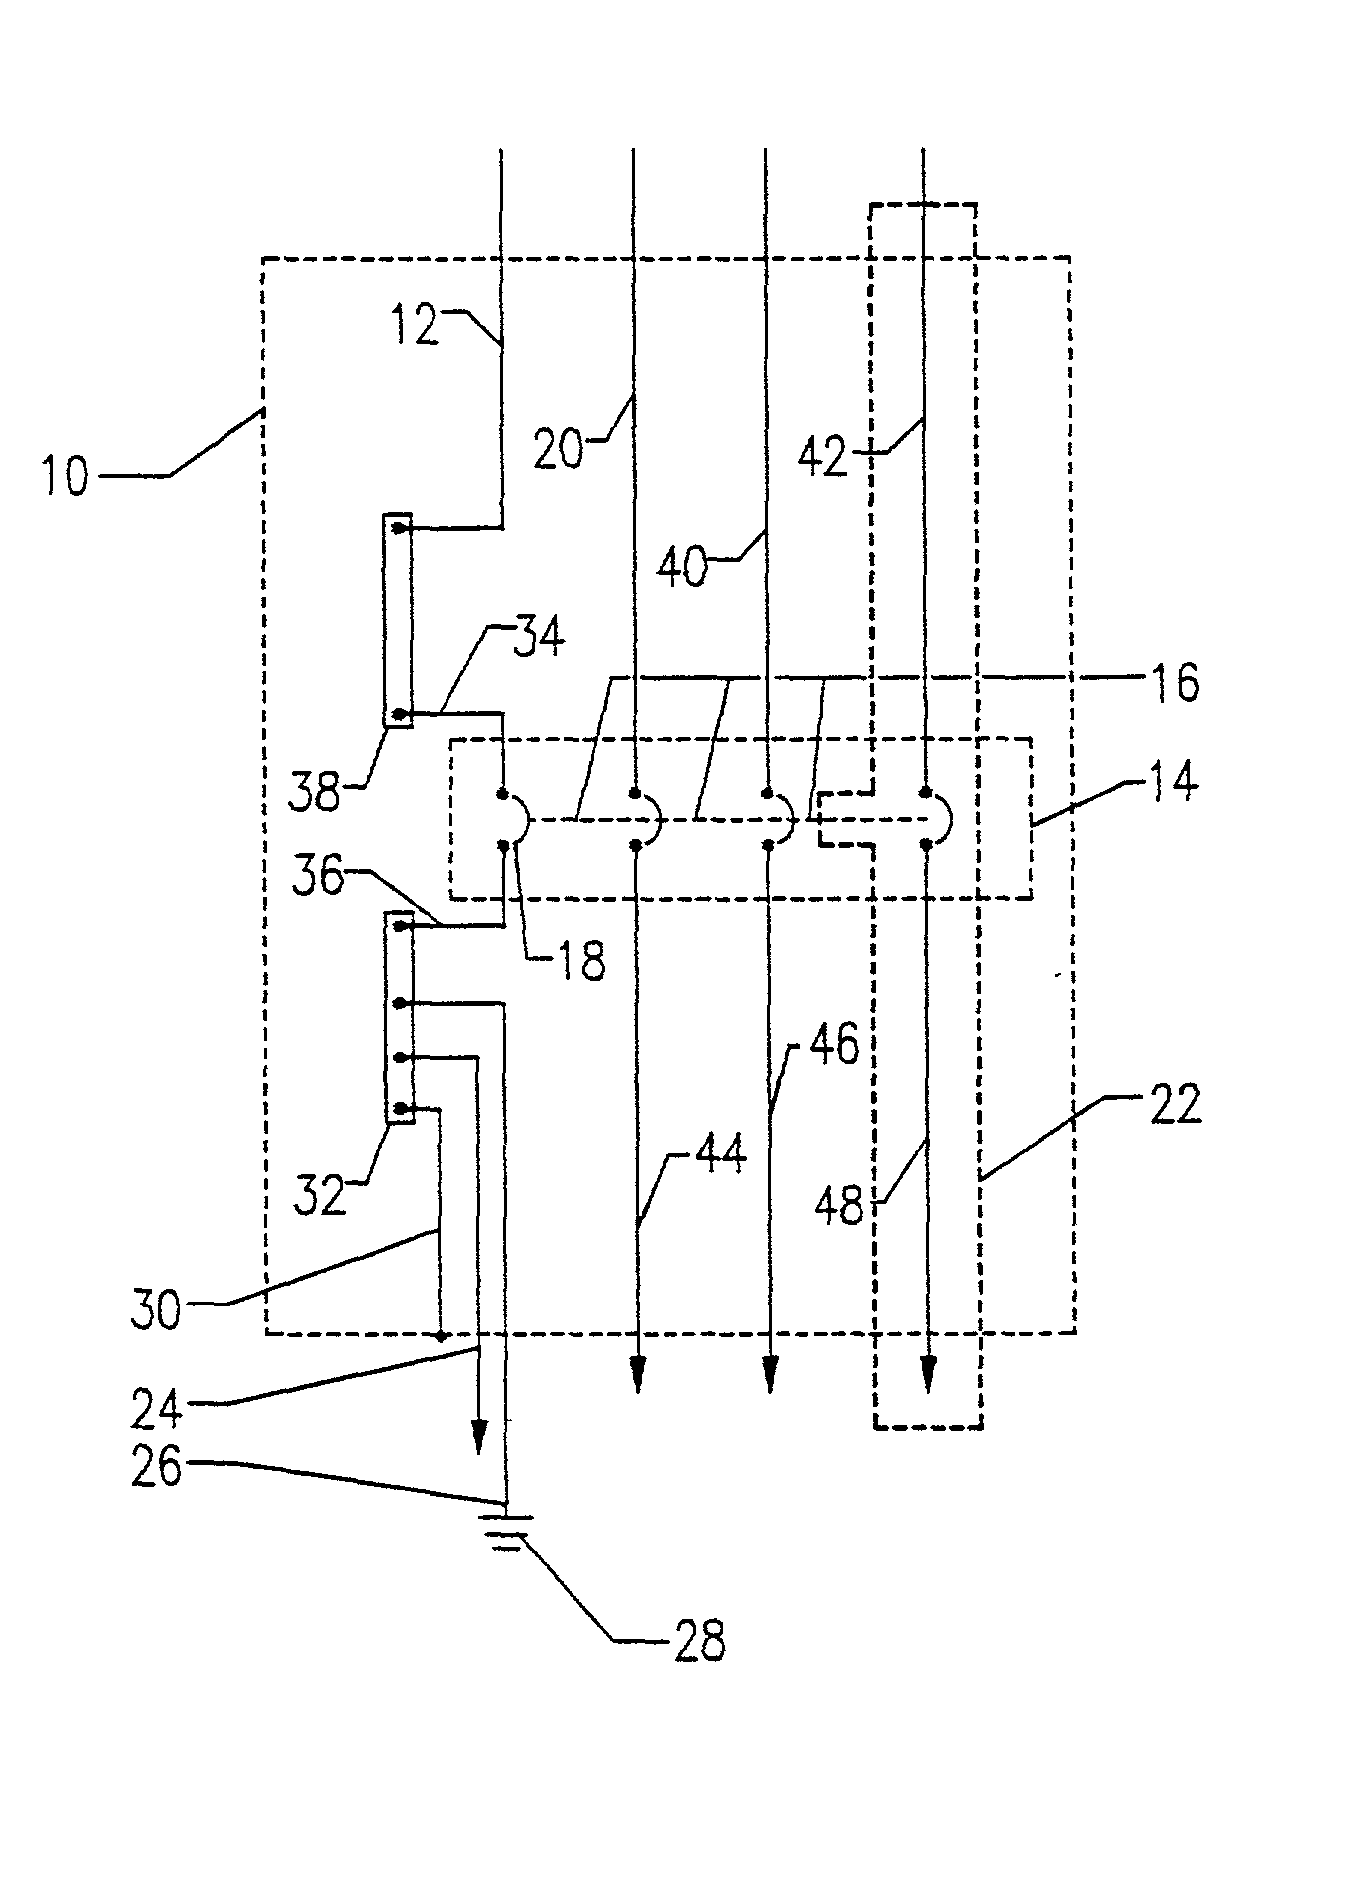 Apparatus and method for protecting grounding electrode conductors from overcurrents